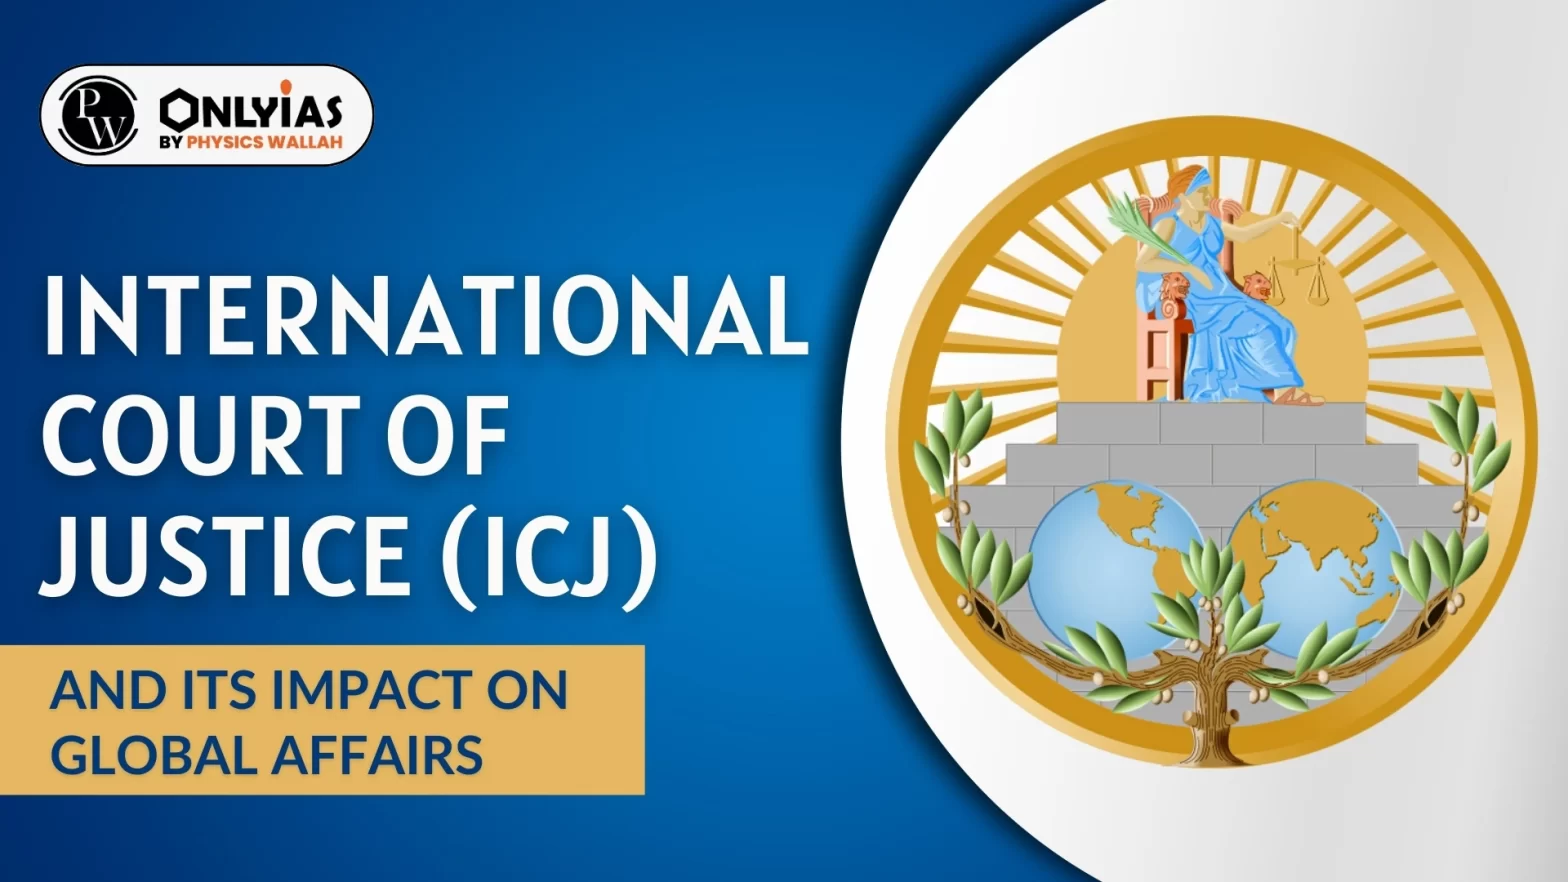 International Court of Justice (ICJ) and Its Impact on Global Affairs